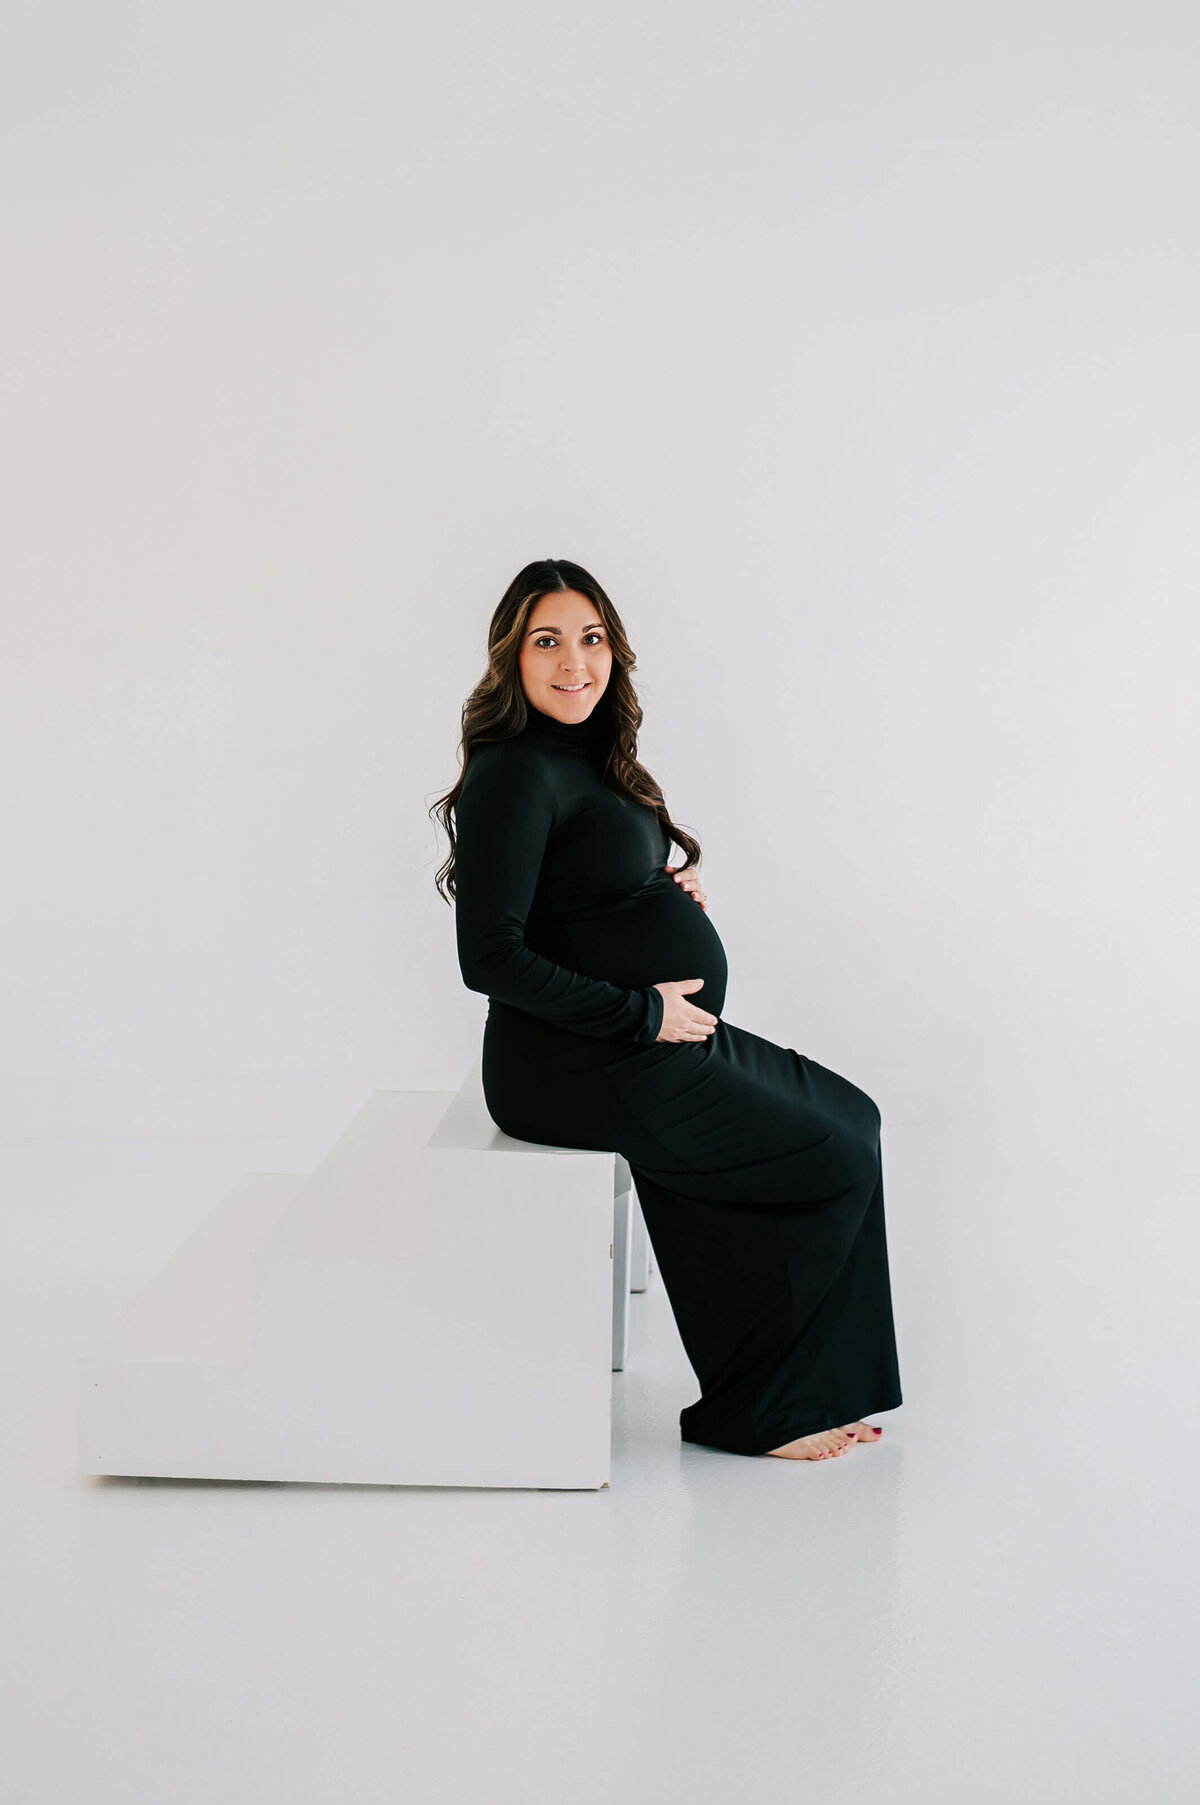 Springfield Mo maternity photographer Jessica Kennedy of The XO Photography captures pregnant mom in black dress sitting on steps